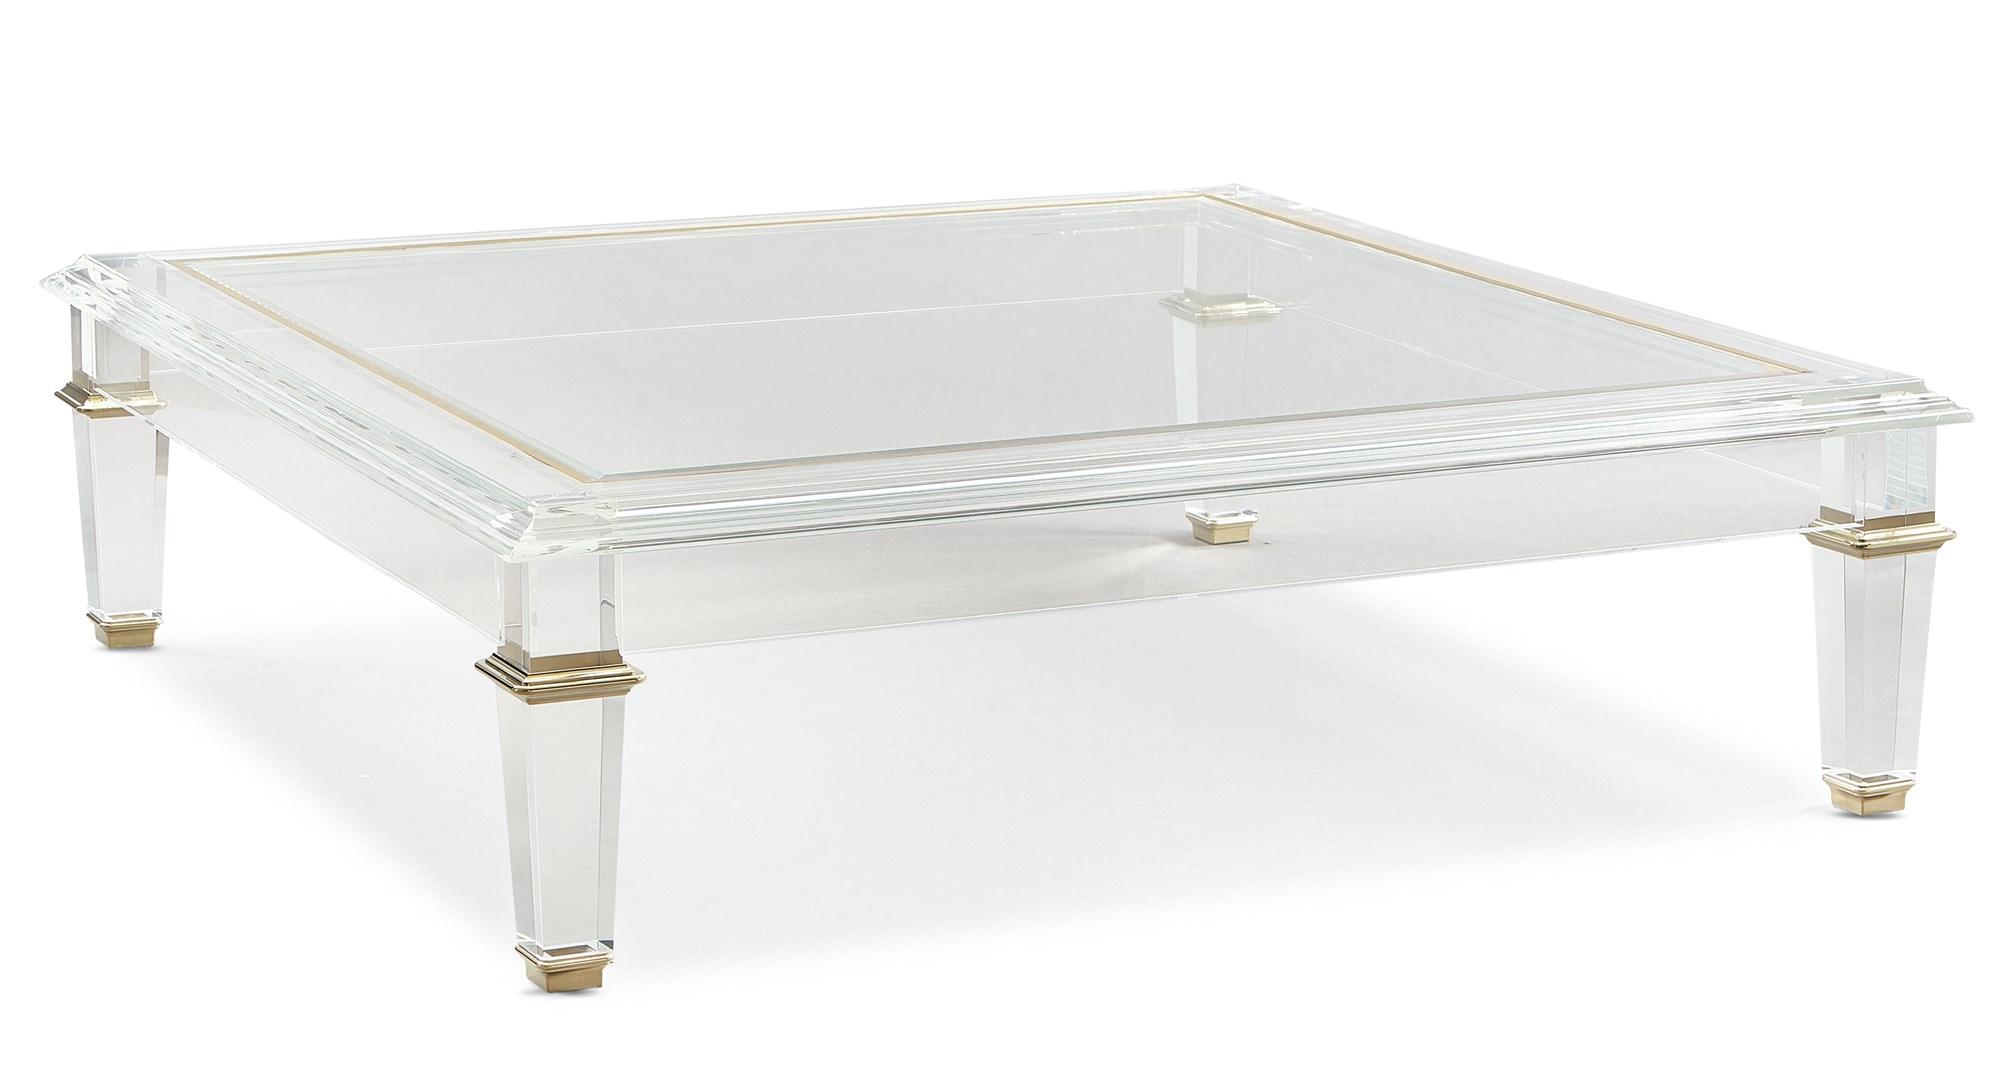 Contemporary Coffee Table PIERRE COCKTAIL TABLE SIG-419-403 in Metallic, Gold 